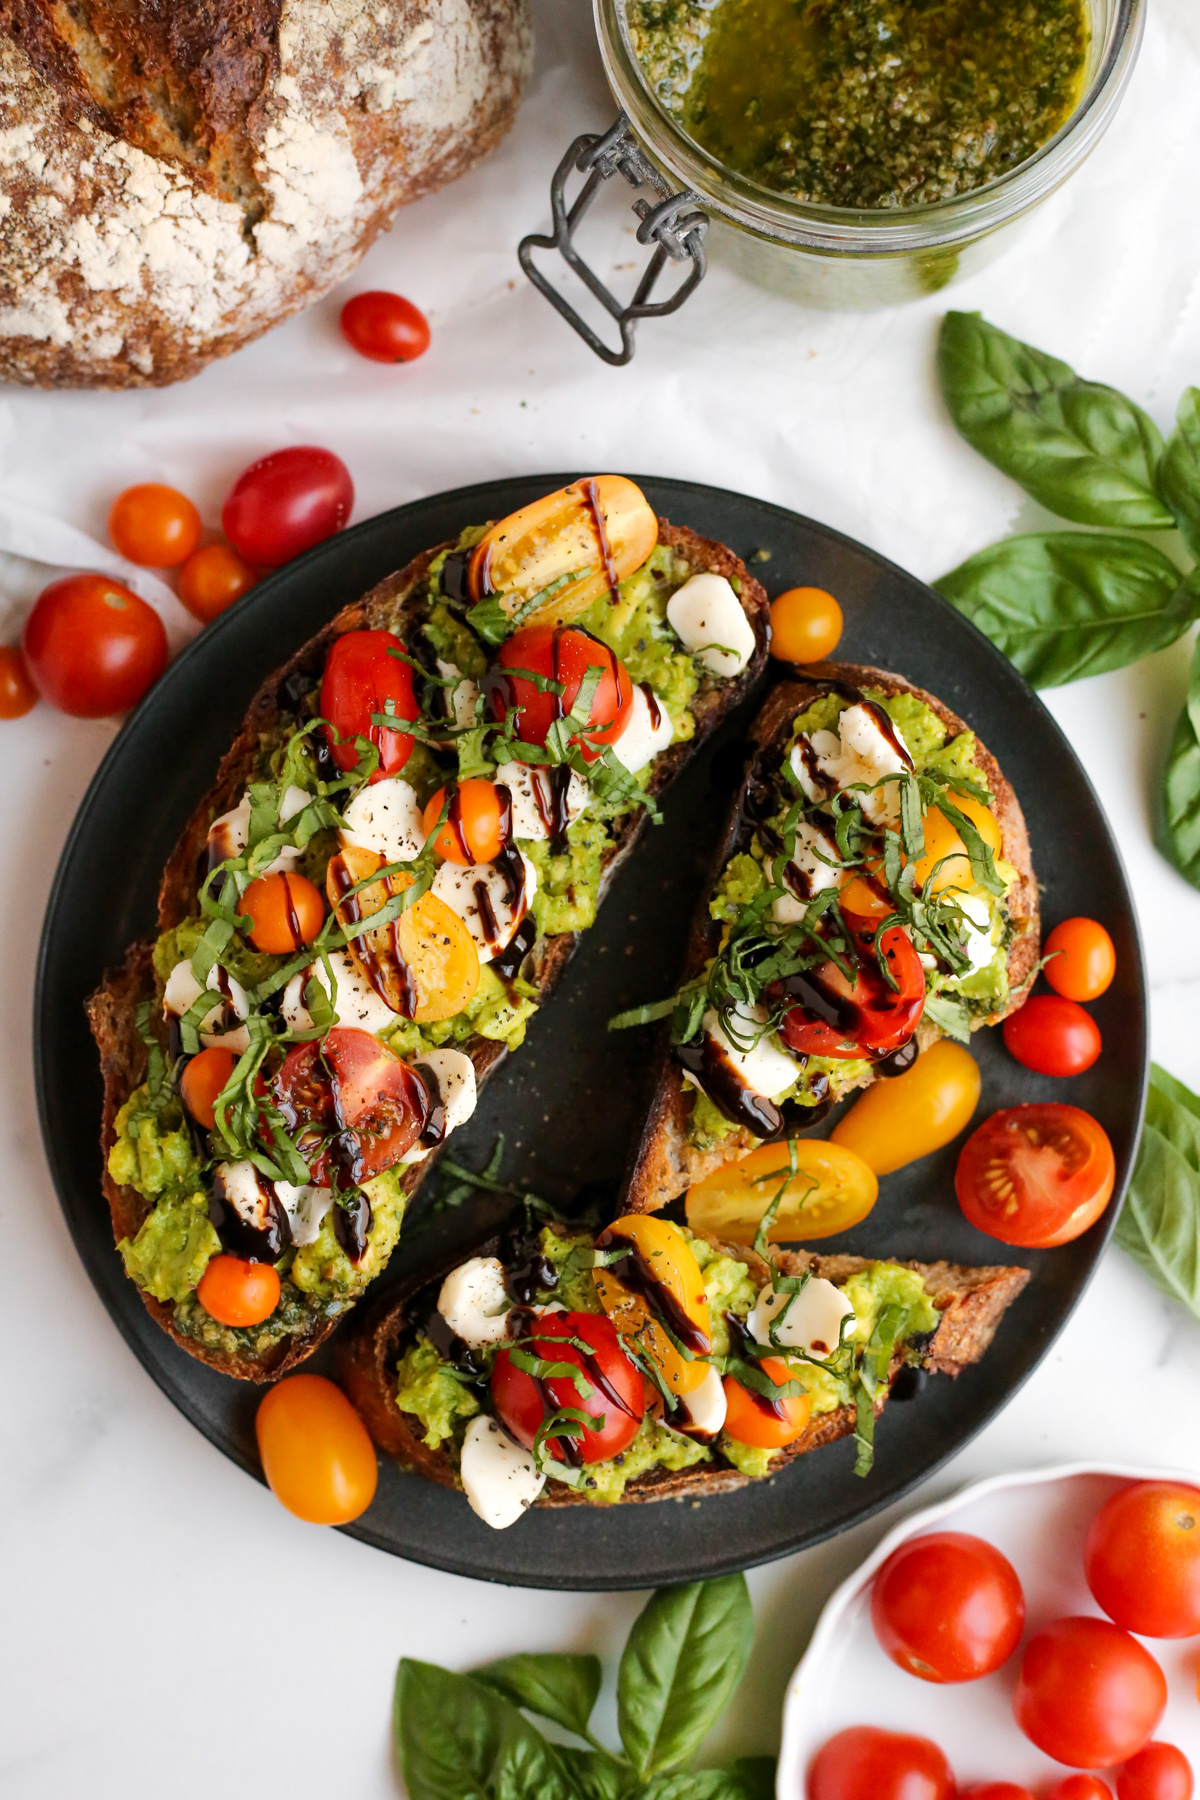 Overhead view of two thick slices of toasted multigrain bread, smeared with pesto sauce and stacked with a layer of mashed avocado, sliced cherry tomatoes and mozzarella cheese, fresh basil, and drizzled with balsamic glaze. The avocado toast is served on a black ceramic dish on a kitchen countertop